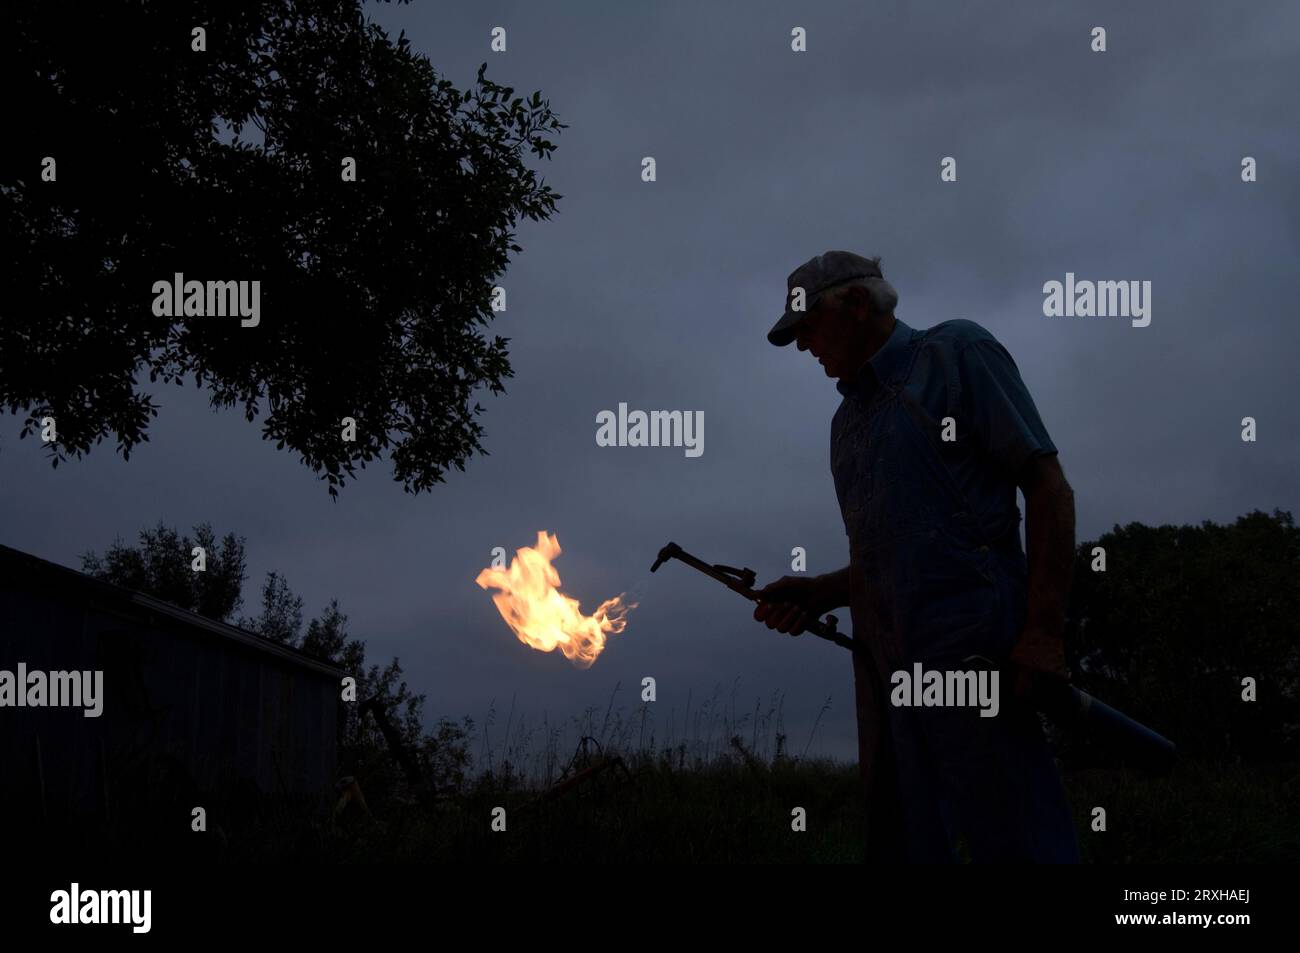 Man holds a welding torch with bright flames against an overcast sky and silhouetted trees; Cortland, Nebraska, United States of America Stock Photo